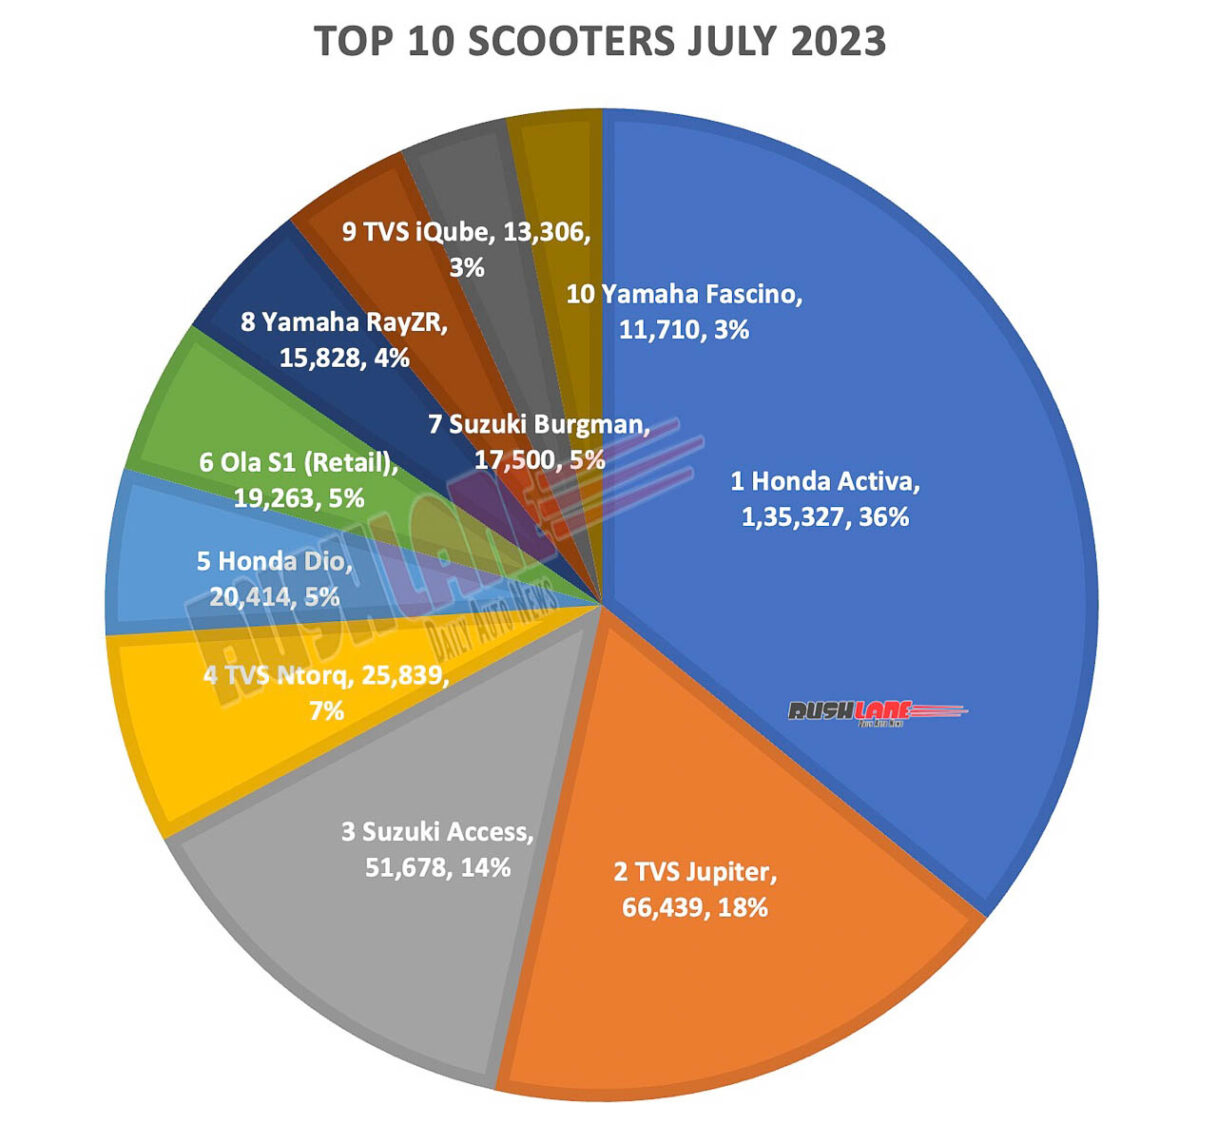 Top 10 Scooters July 2023